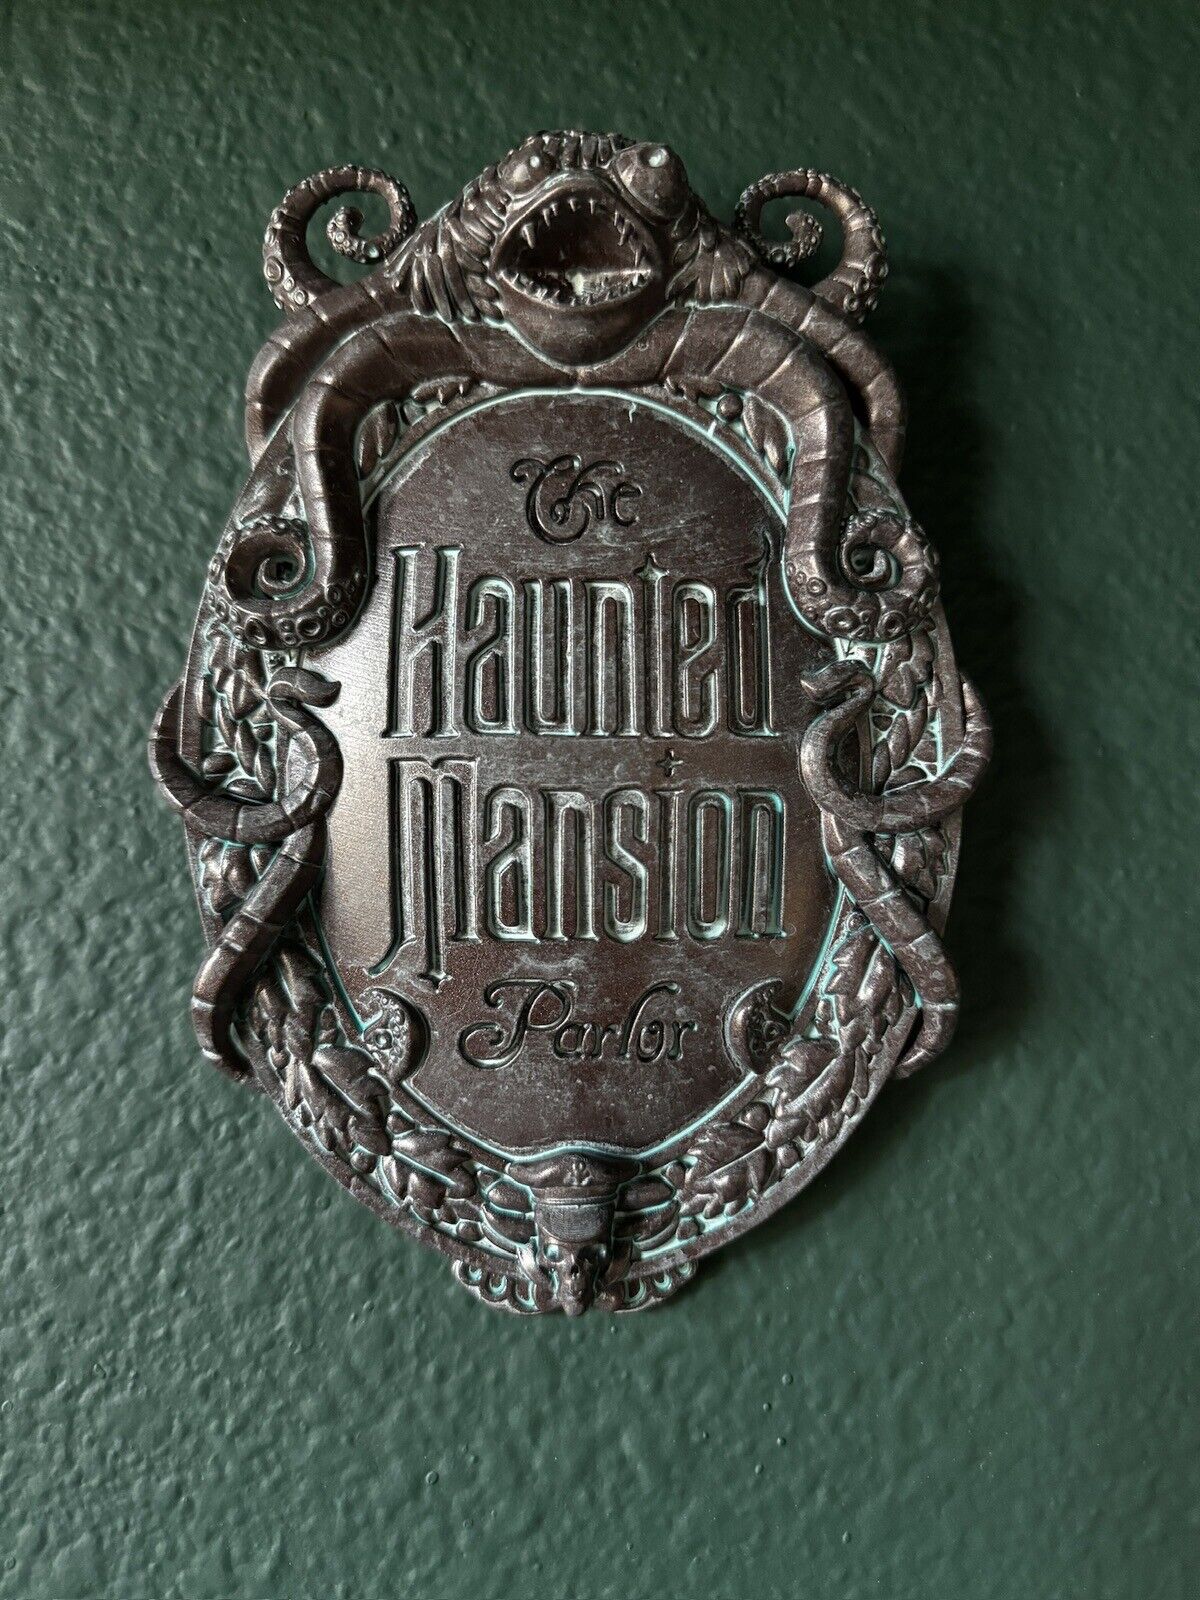 8” One Of A Kind “prototype” Haunted Mansion Parlor Plaque Disney Cruise Ship